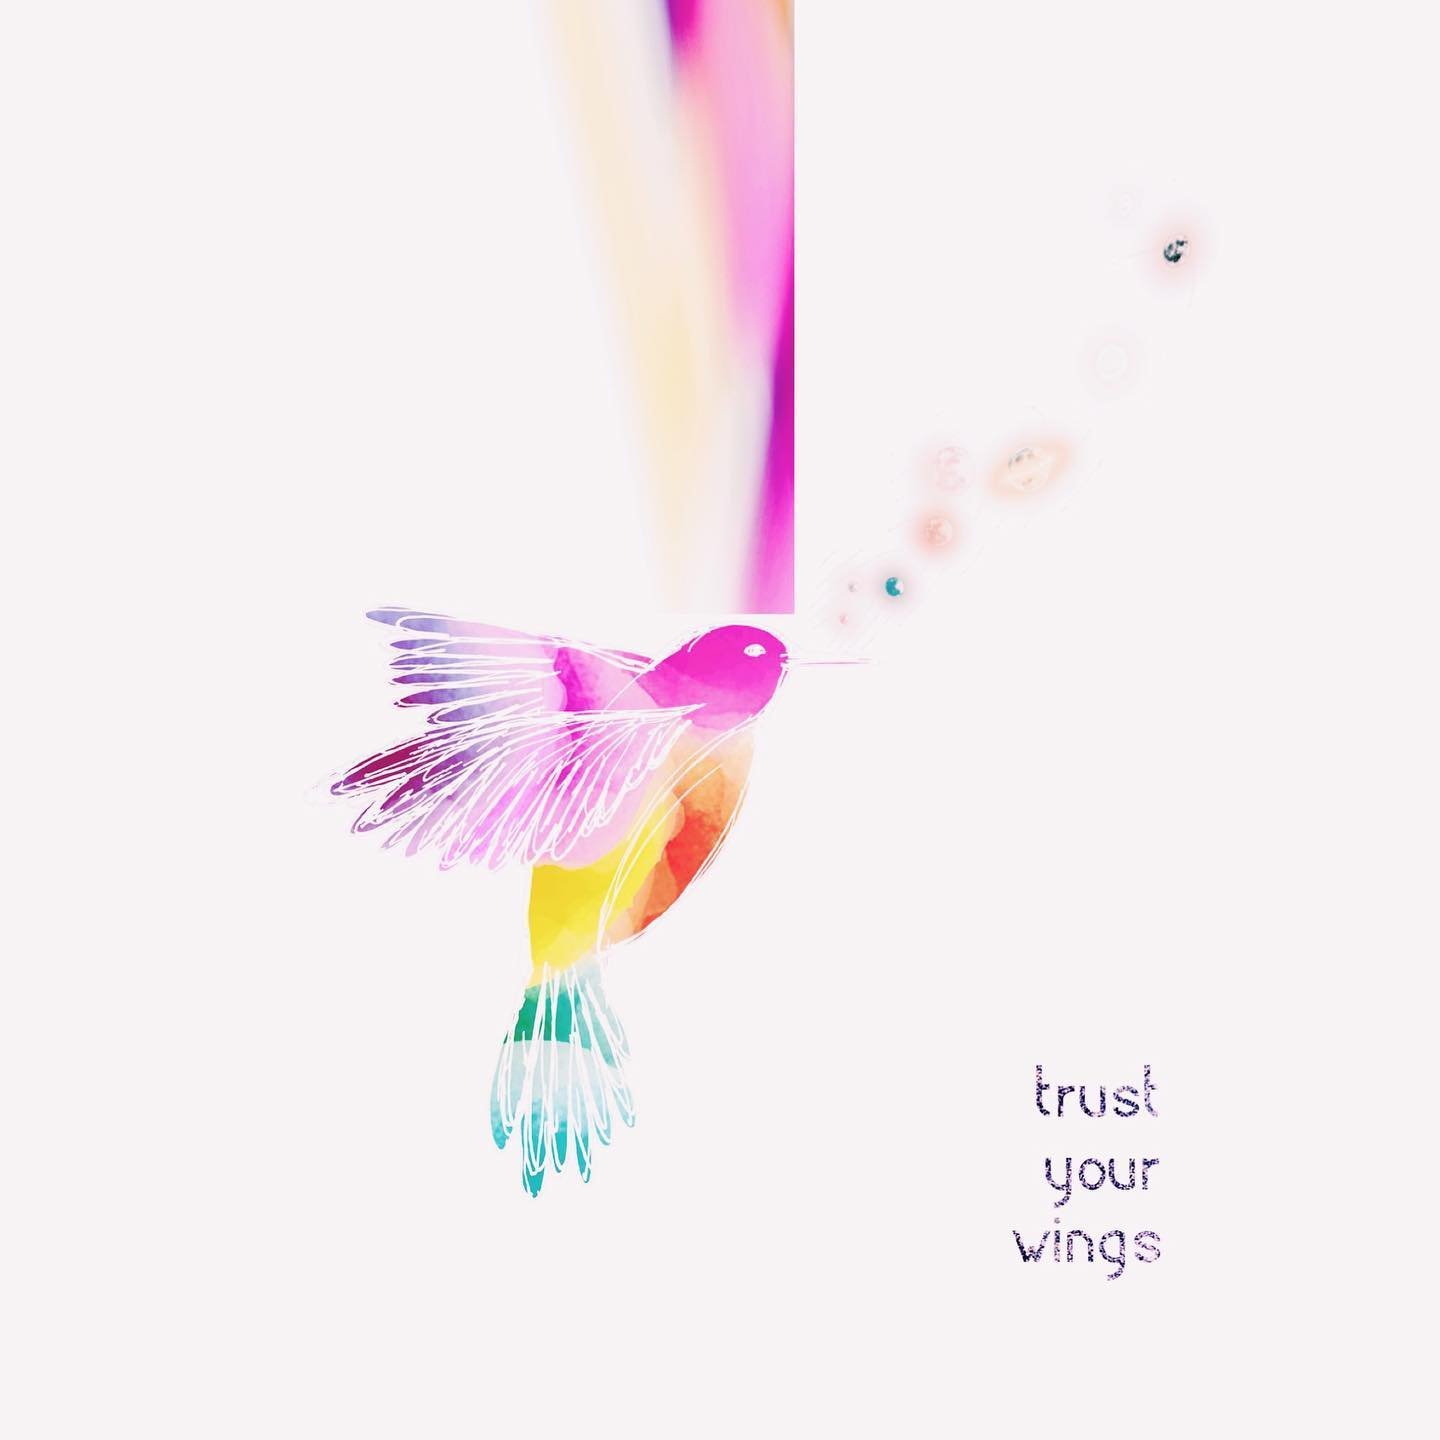 | Trust Your Wings |
They are there to
support &amp; uplift your dreams.

✨

So, jump, leap, reach
believe.
Keep dreaming bigger 
towards the unseen.

✨

Growing as you go, 
unknowing the old,
finding new knows, 
your wingspan of soul--

✨

Taking yo